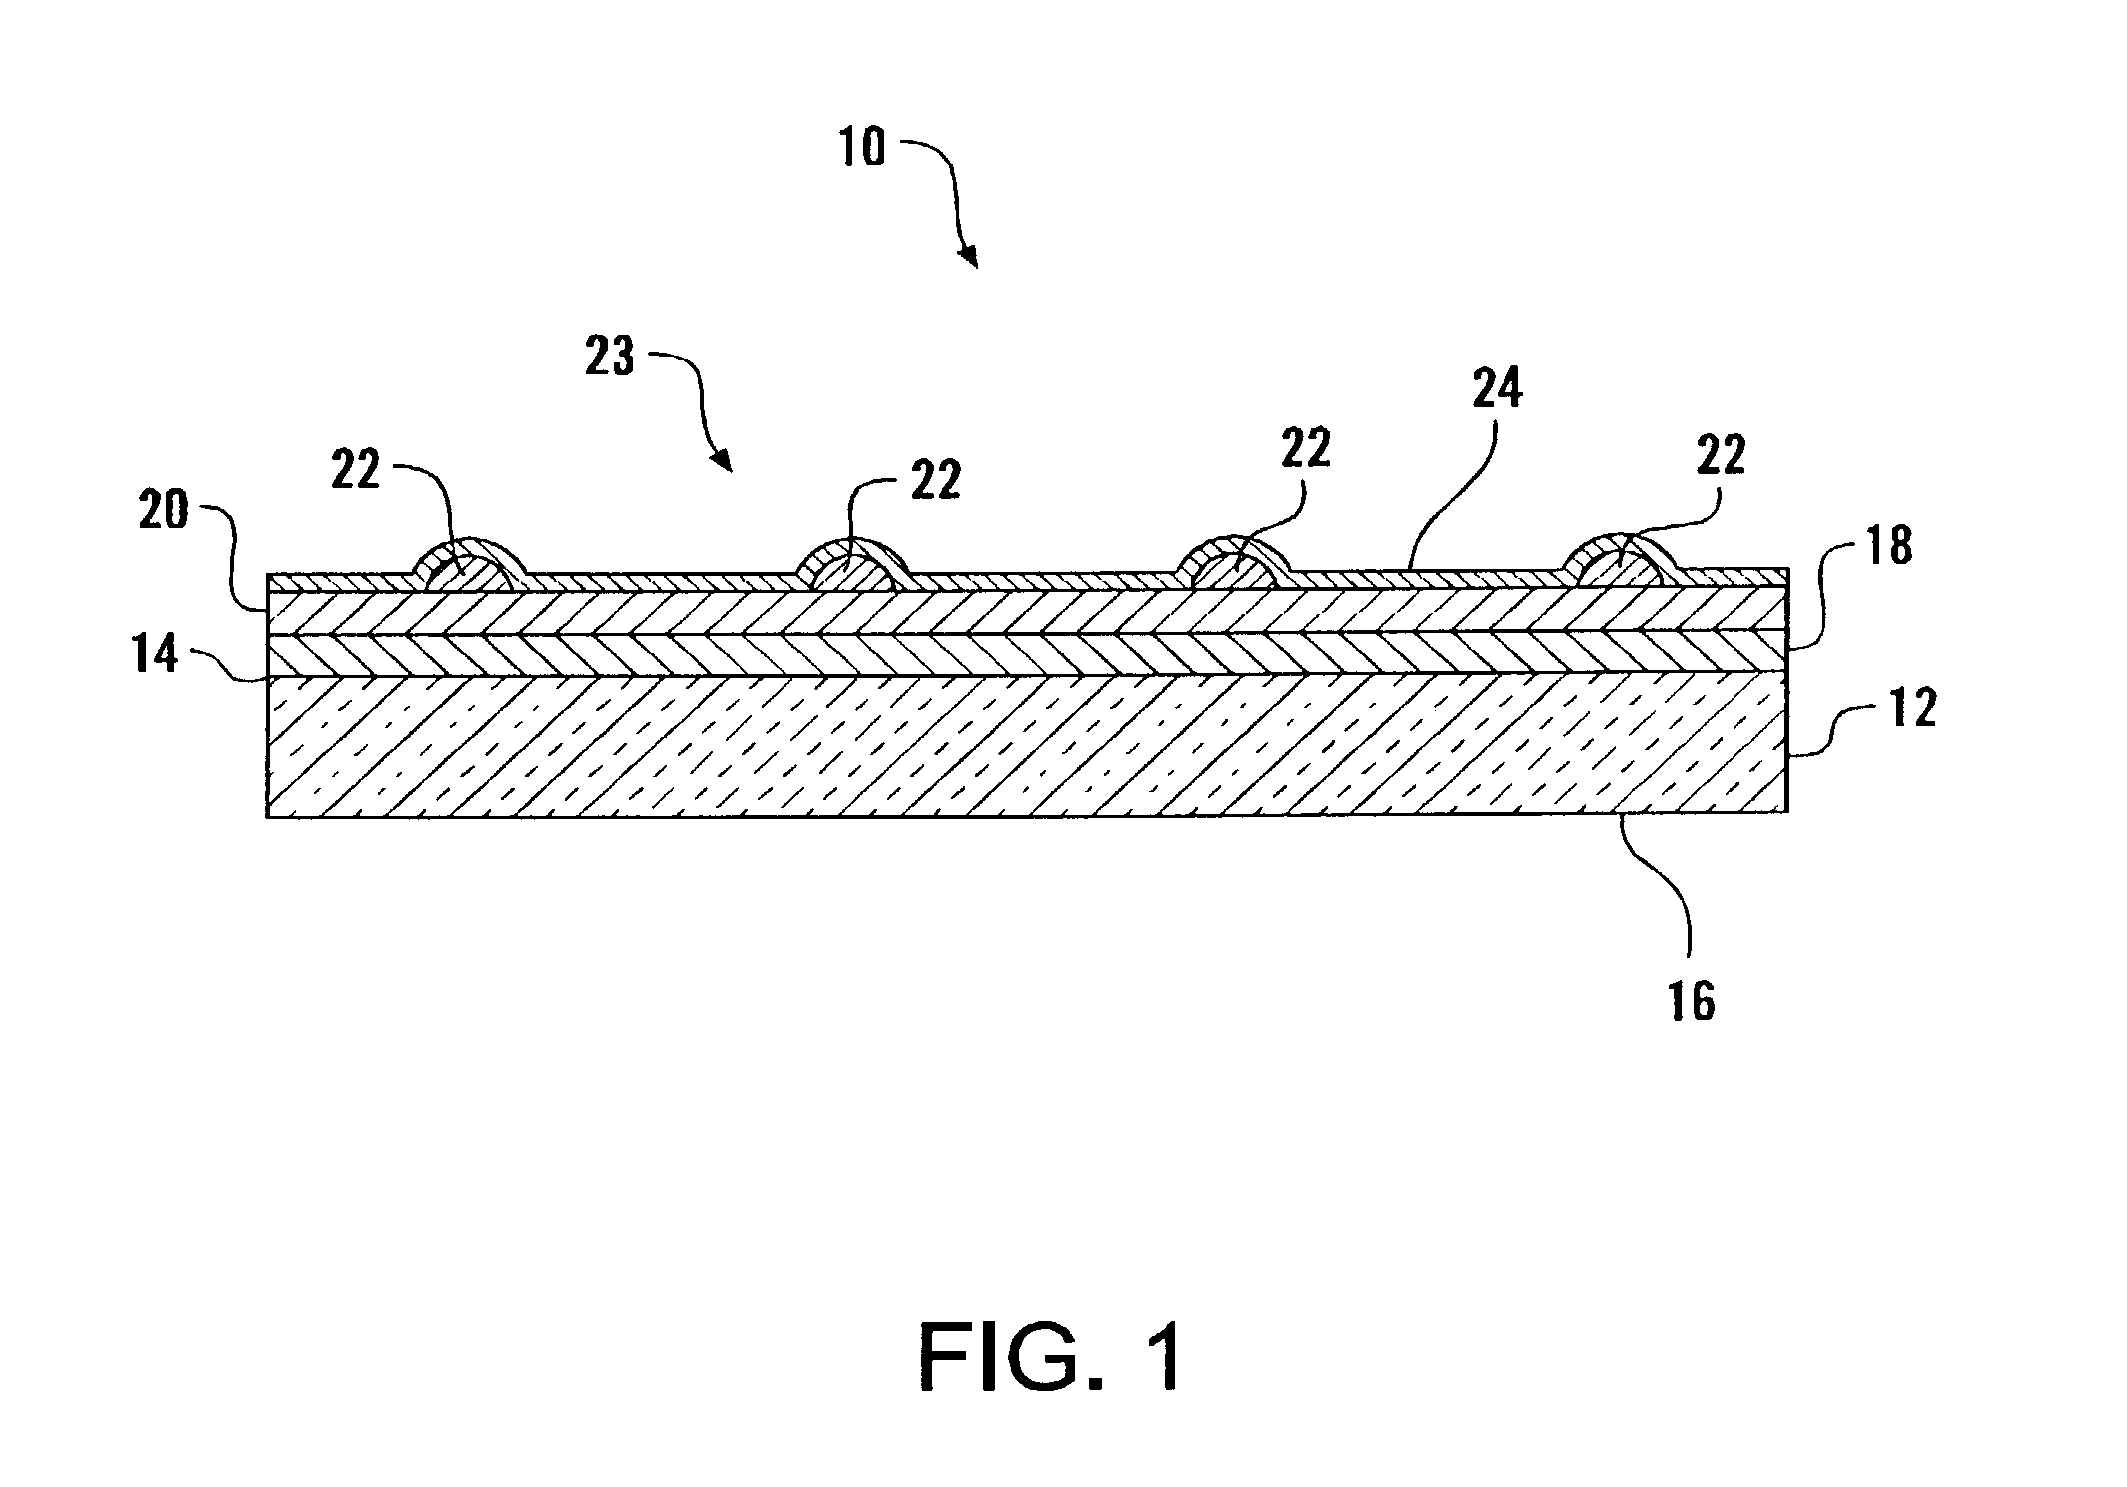 Glossy printed article and method of manufacturing same